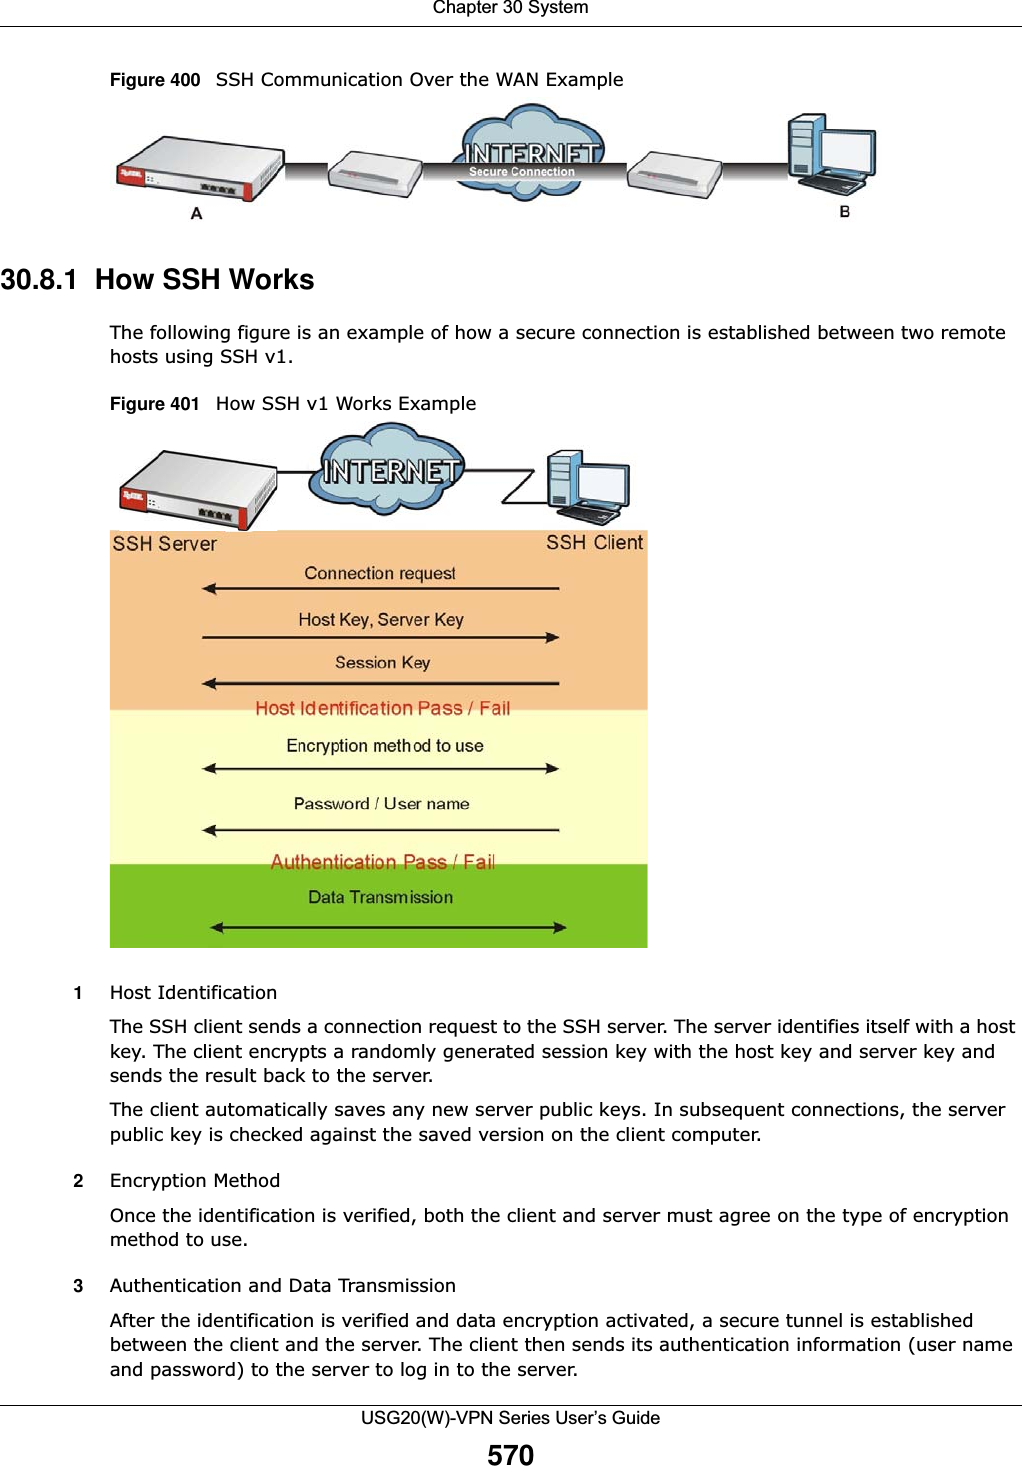 Chapter 30 SystemUSG20(W)-VPN Series User’s Guide570Figure 400   SSH Communication Over the WAN Example30.8.1  How SSH WorksThe following figure is an example of how a secure connection is established between two remote hosts using SSH v1.Figure 401   How SSH v1 Works Example1Host IdentificationThe SSH client sends a connection request to the SSH server. The server identifies itself with a host key. The client encrypts a randomly generated session key with the host key and server key and sends the result back to the server.The client automatically saves any new server public keys. In subsequent connections, the server public key is checked against the saved version on the client computer.2Encryption MethodOnce the identification is verified, both the client and server must agree on the type of encryption method to use.3Authentication and Data TransmissionAfter the identification is verified and data encryption activated, a secure tunnel is established between the client and the server. The client then sends its authentication information (user name and password) to the server to log in to the server.